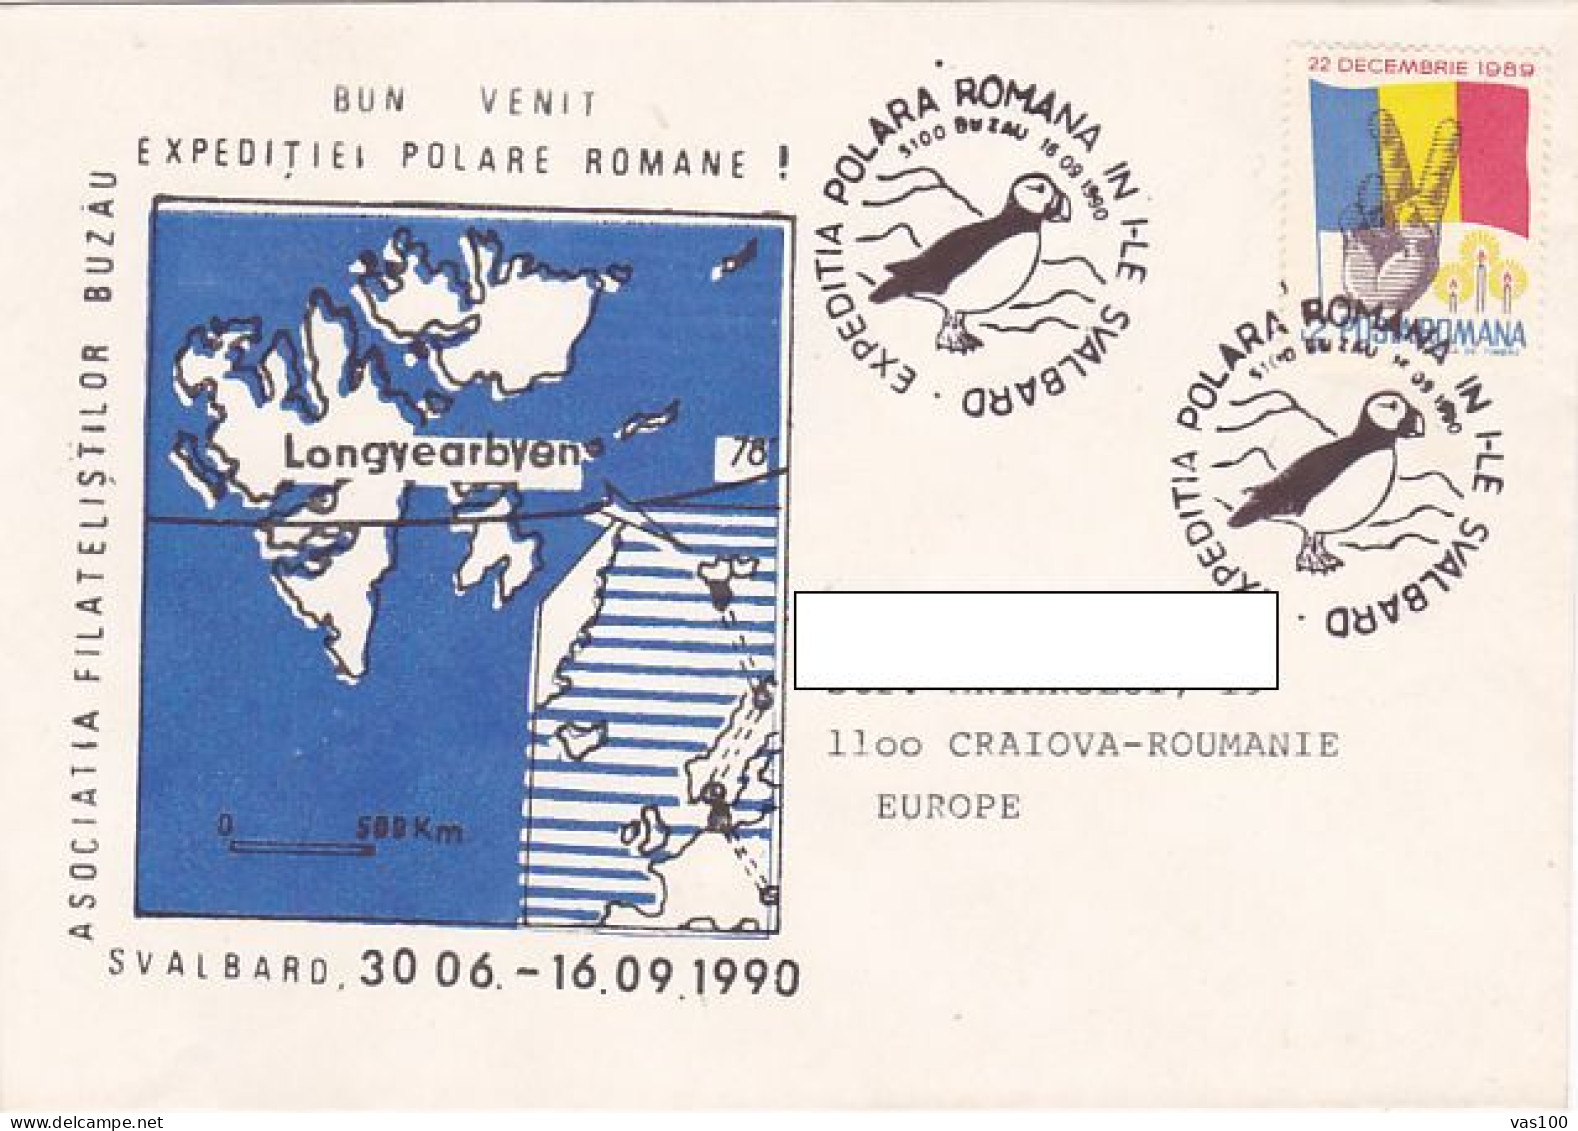 NORTH POLE, ARCTIC EXPEDITION, ROMANIAN EXPEDITION IN SVALBARD, PUFFIN, SPECIAL COVER, 1990, ROMANIA - Expéditions Arctiques